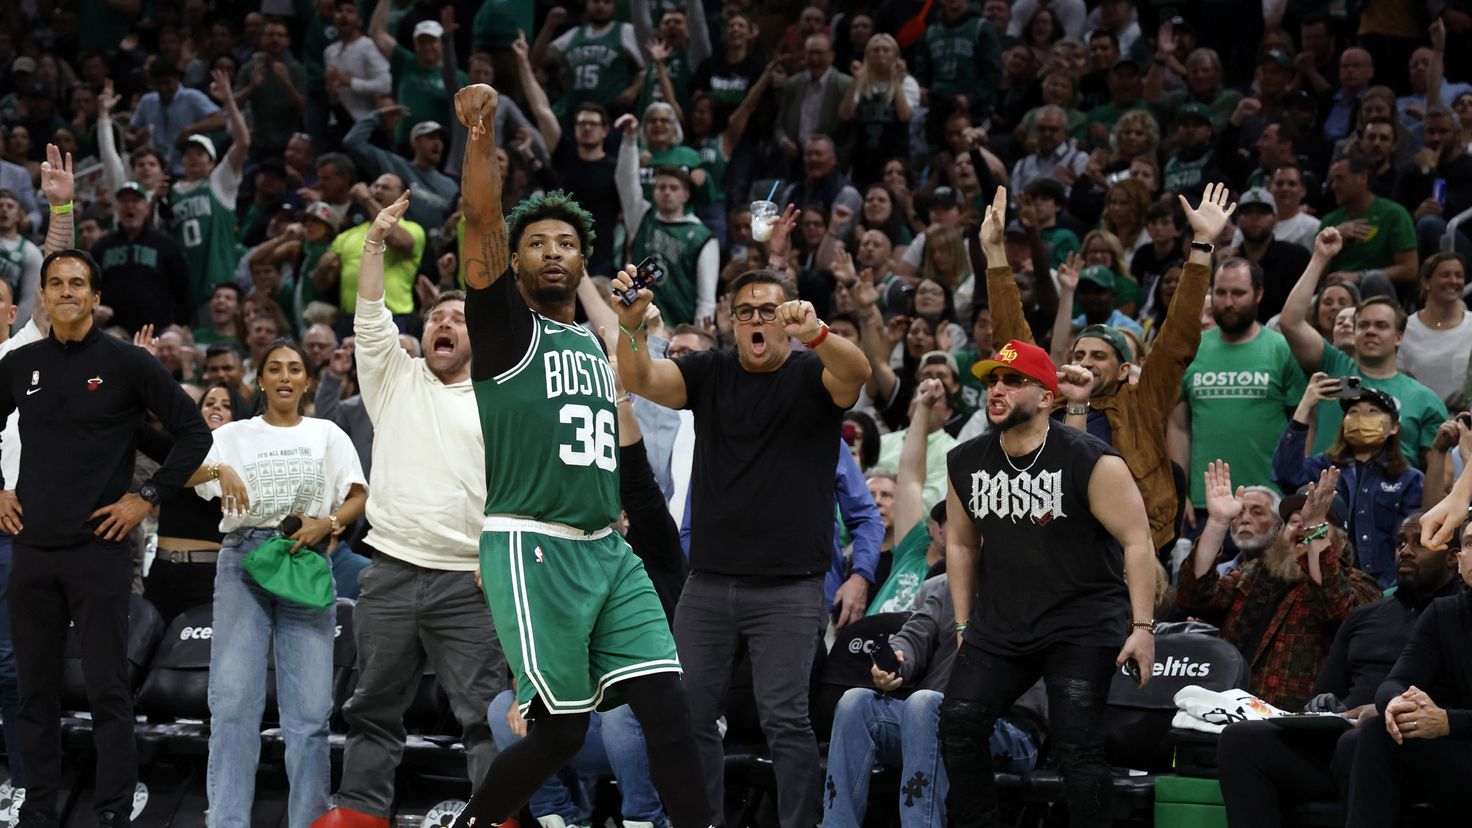 Late or not, the Celtics bounce back
